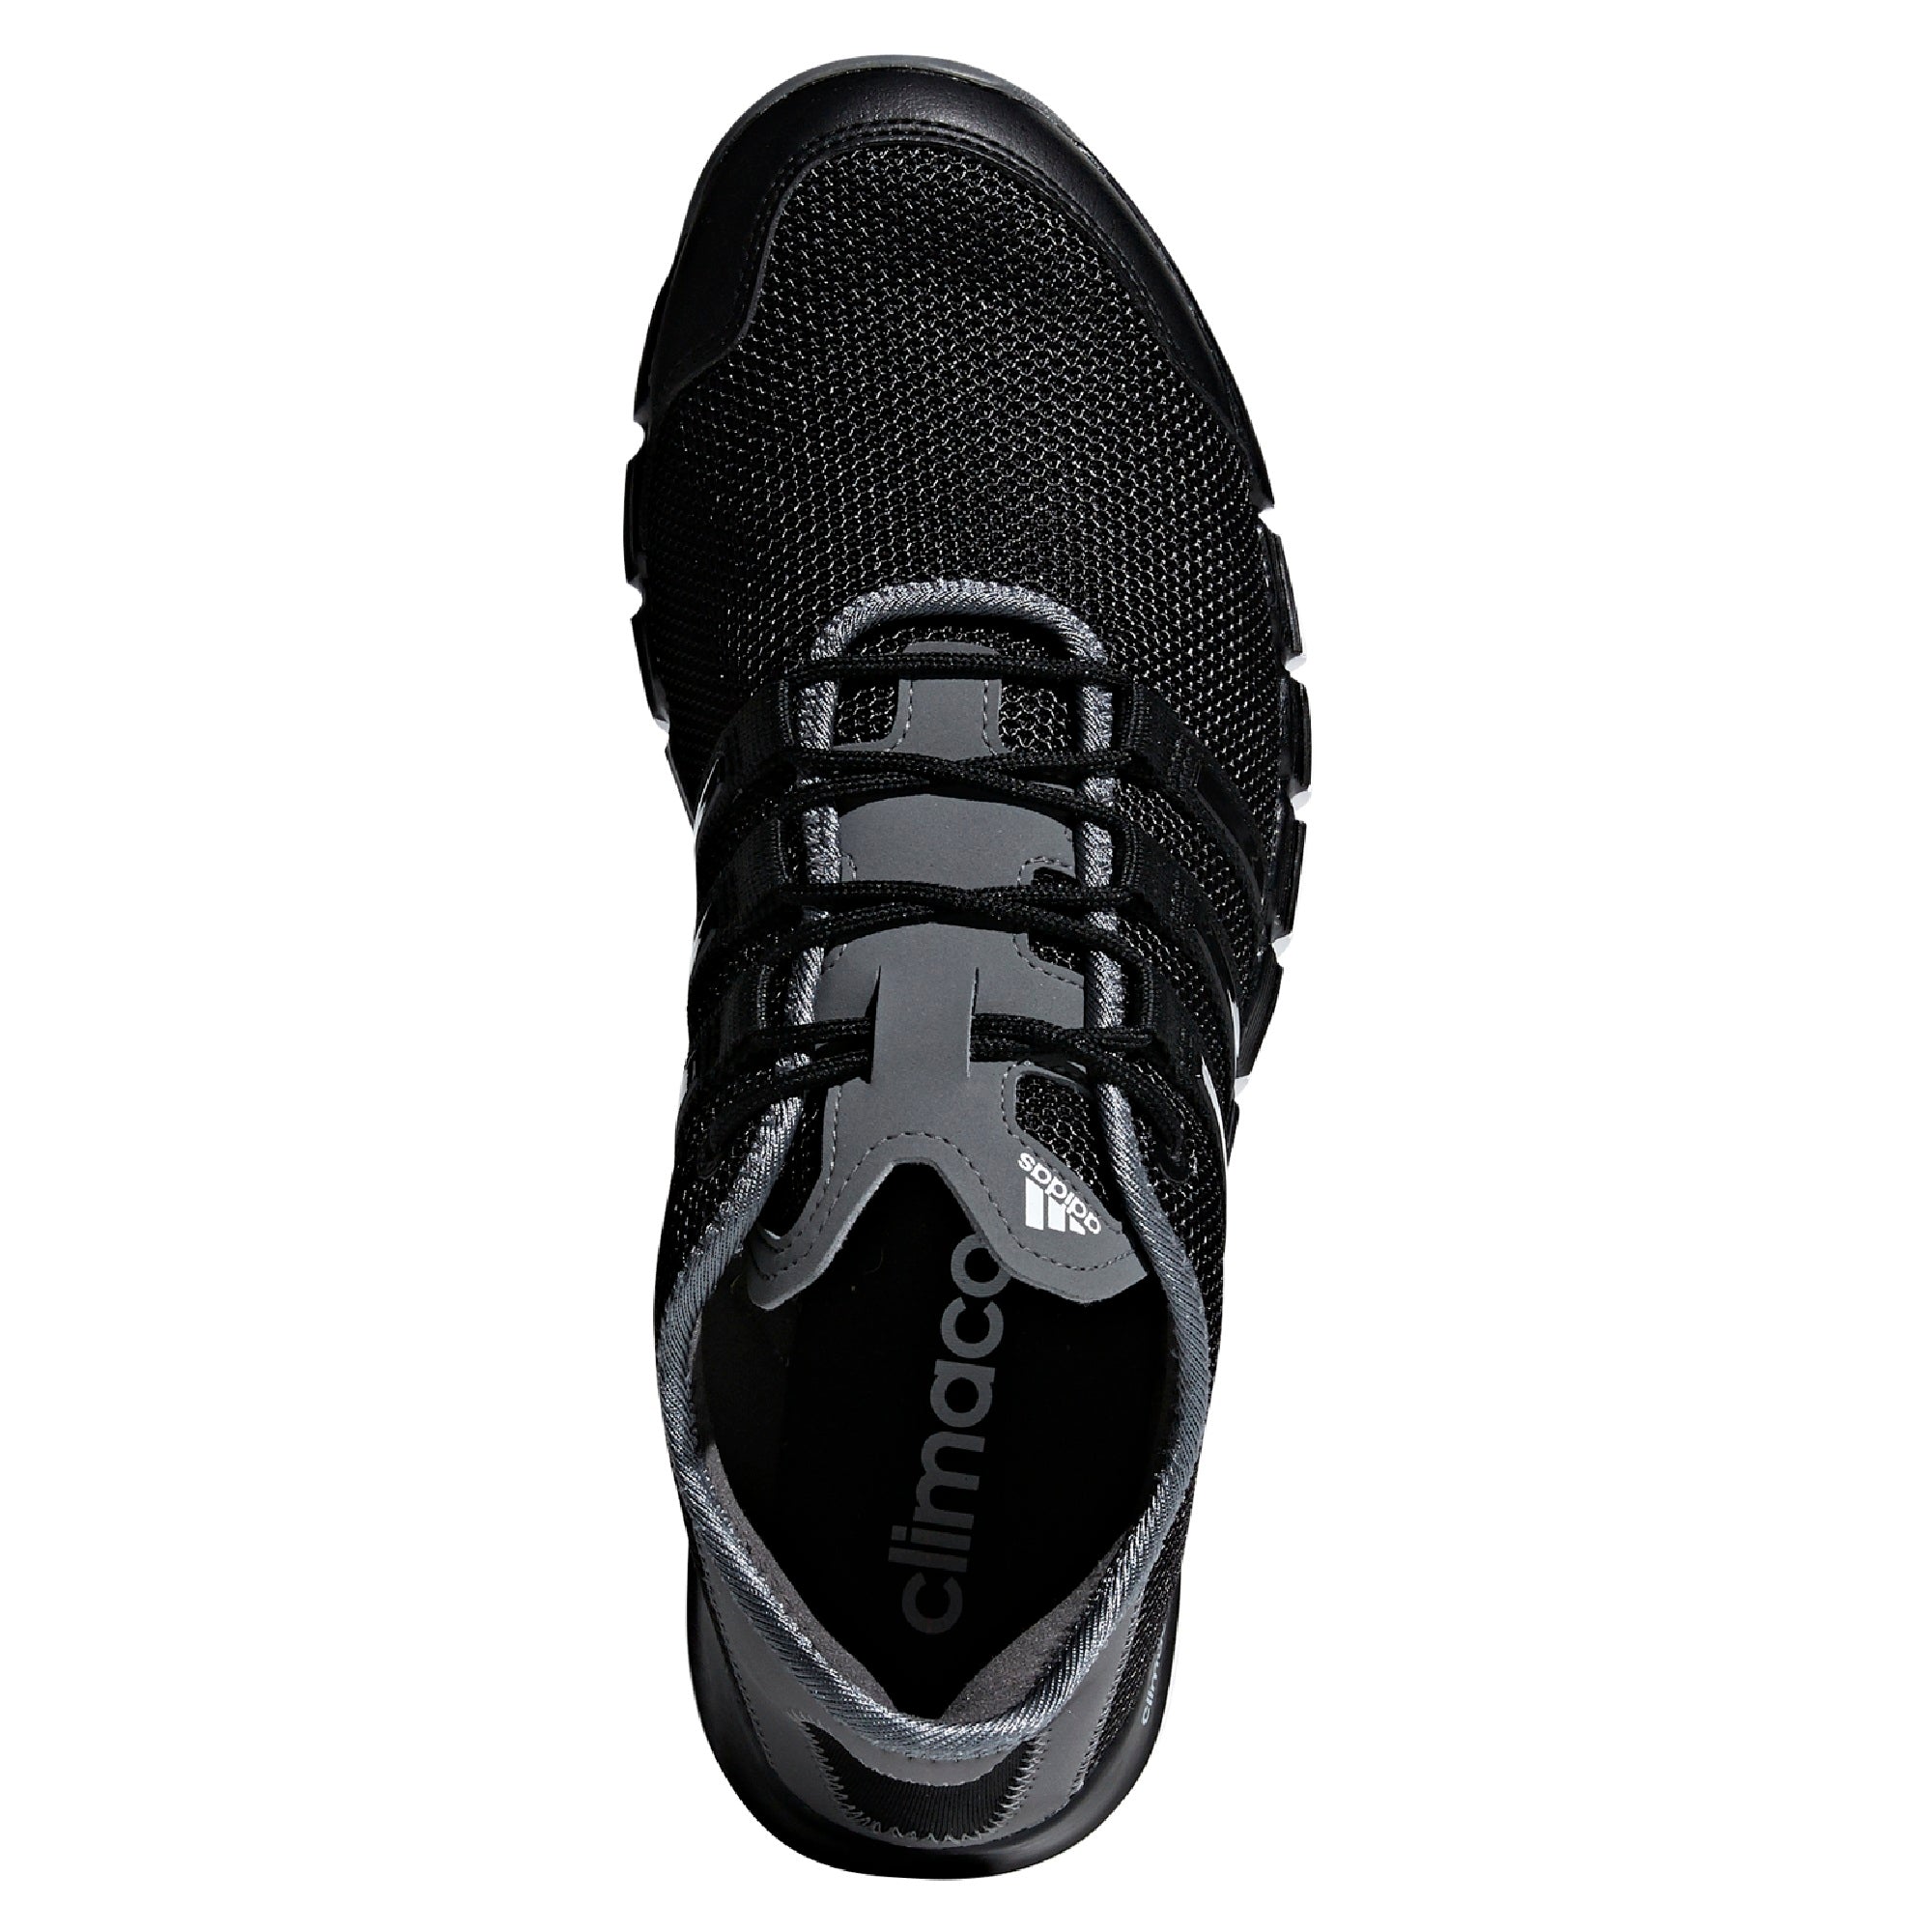 adidas climacool golf shoes price